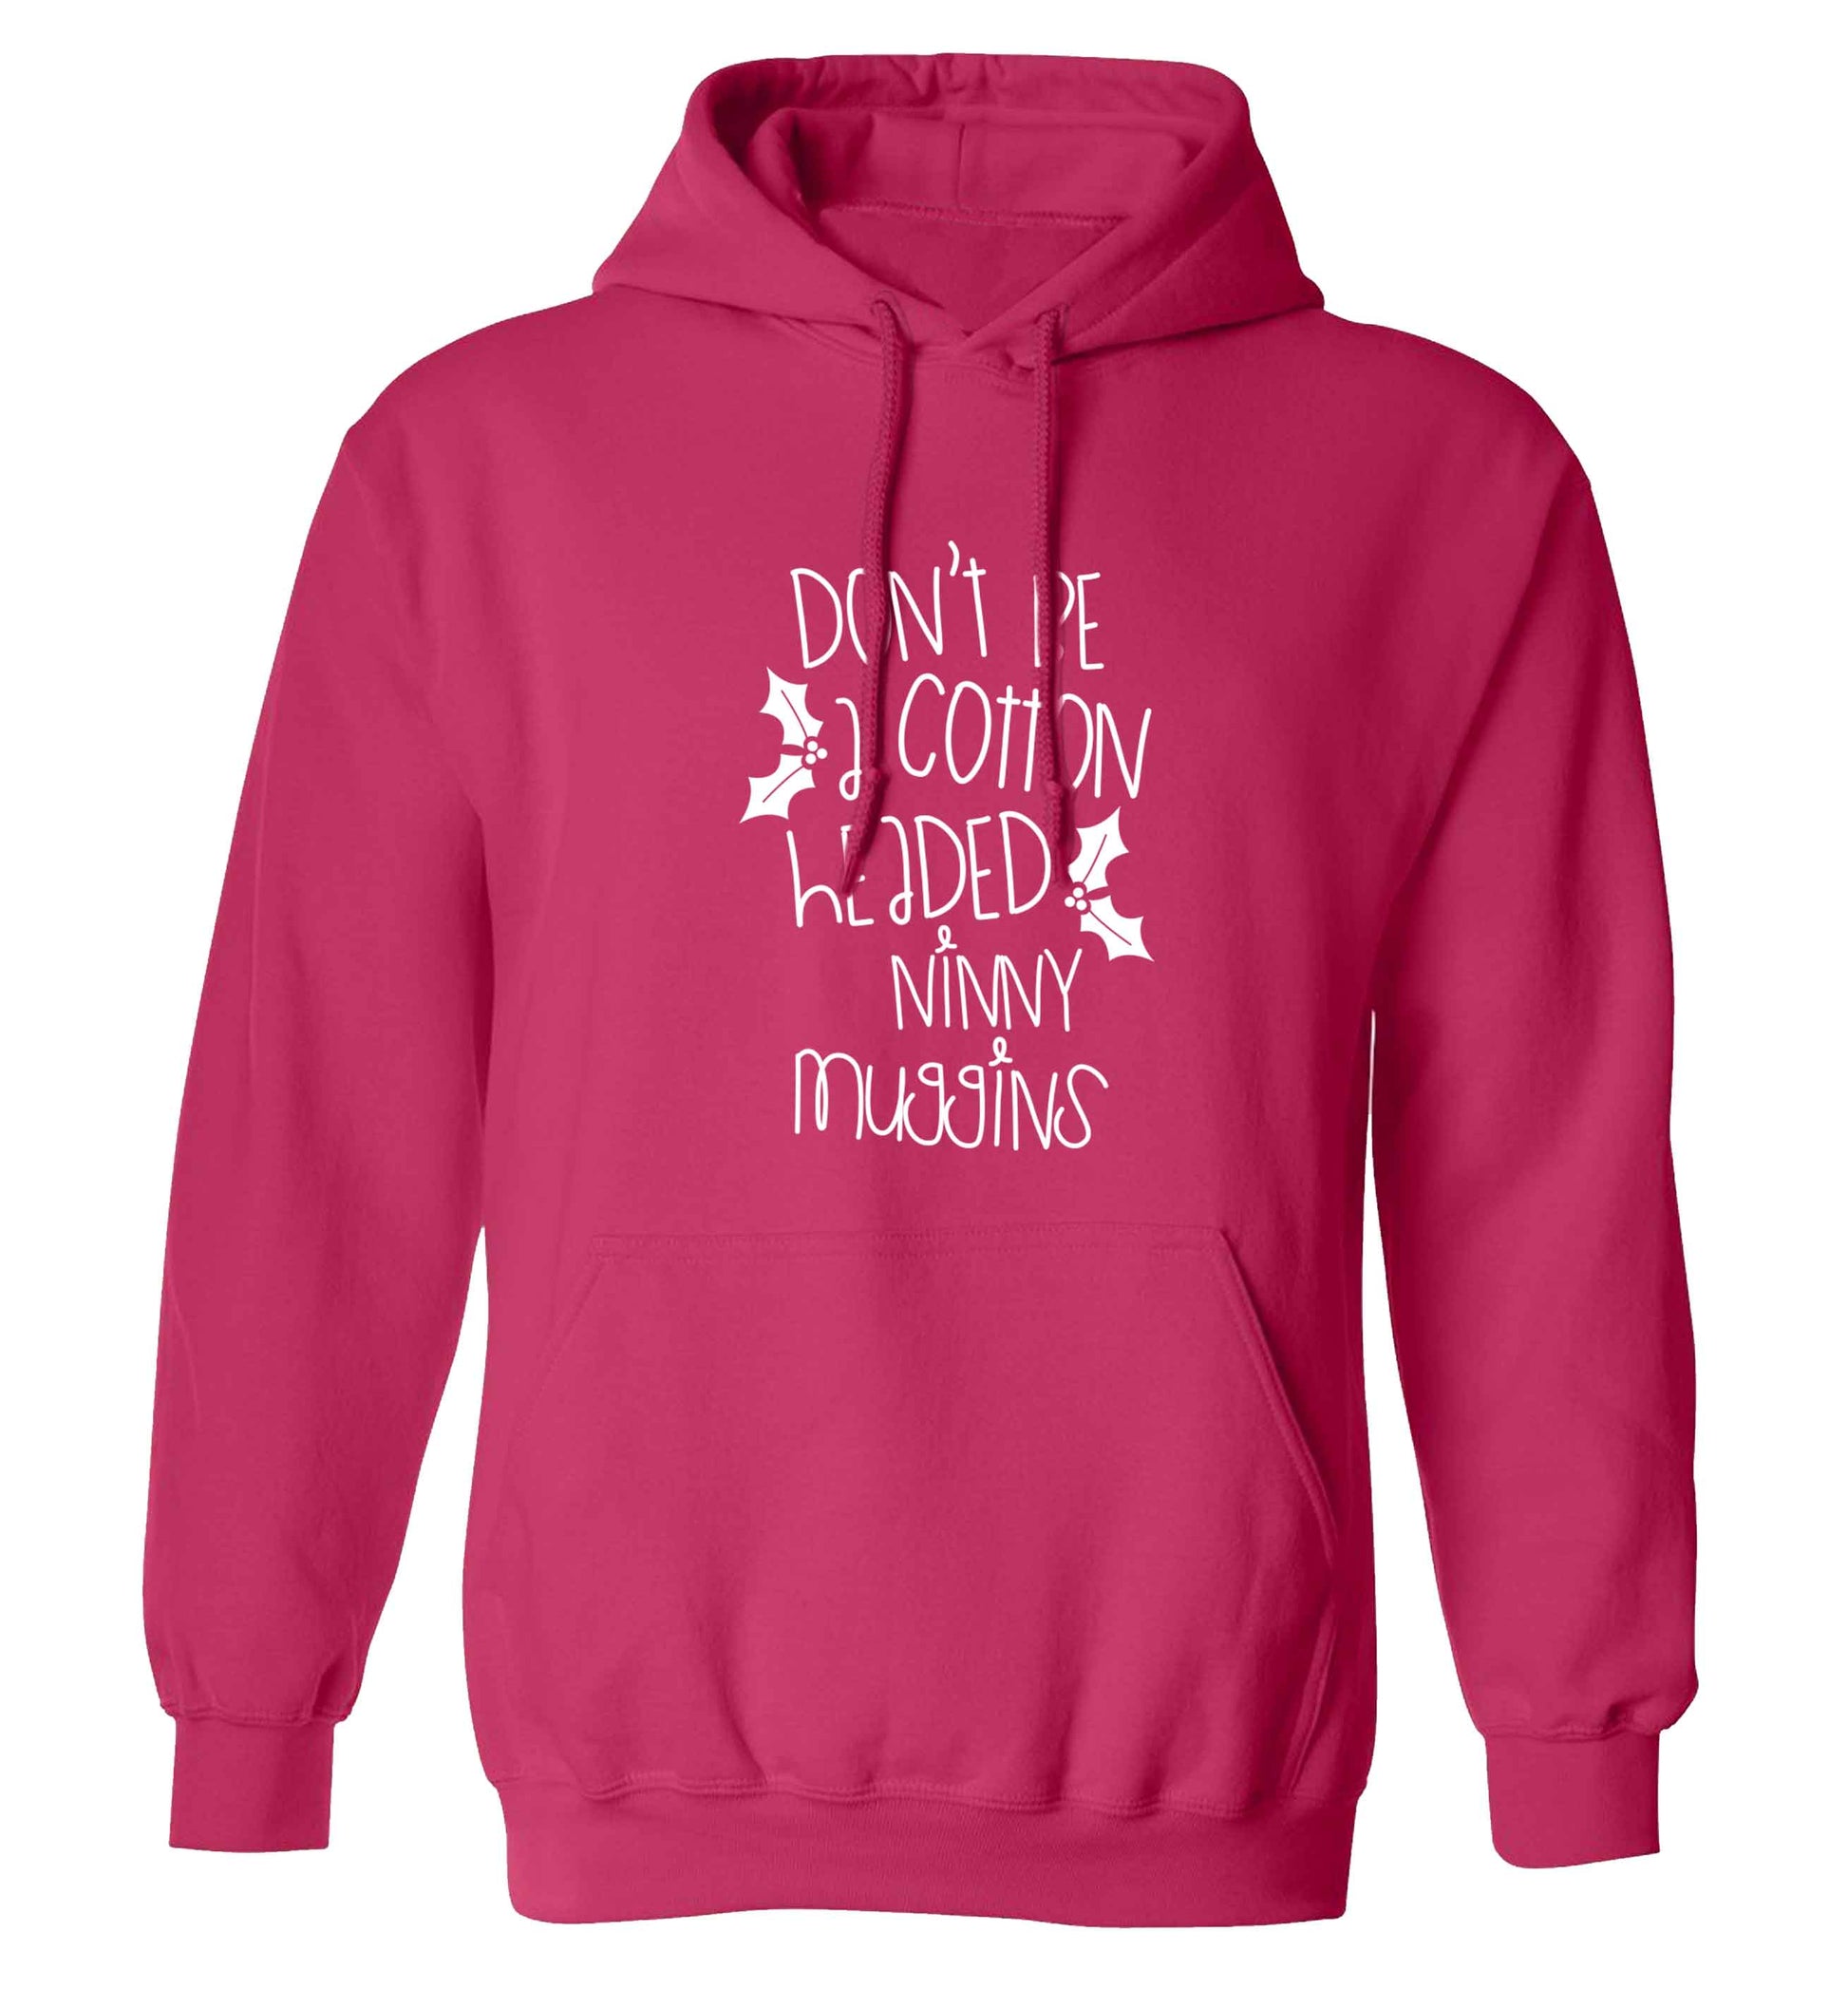 Too Late to be Good adults unisex pink hoodie 2XL